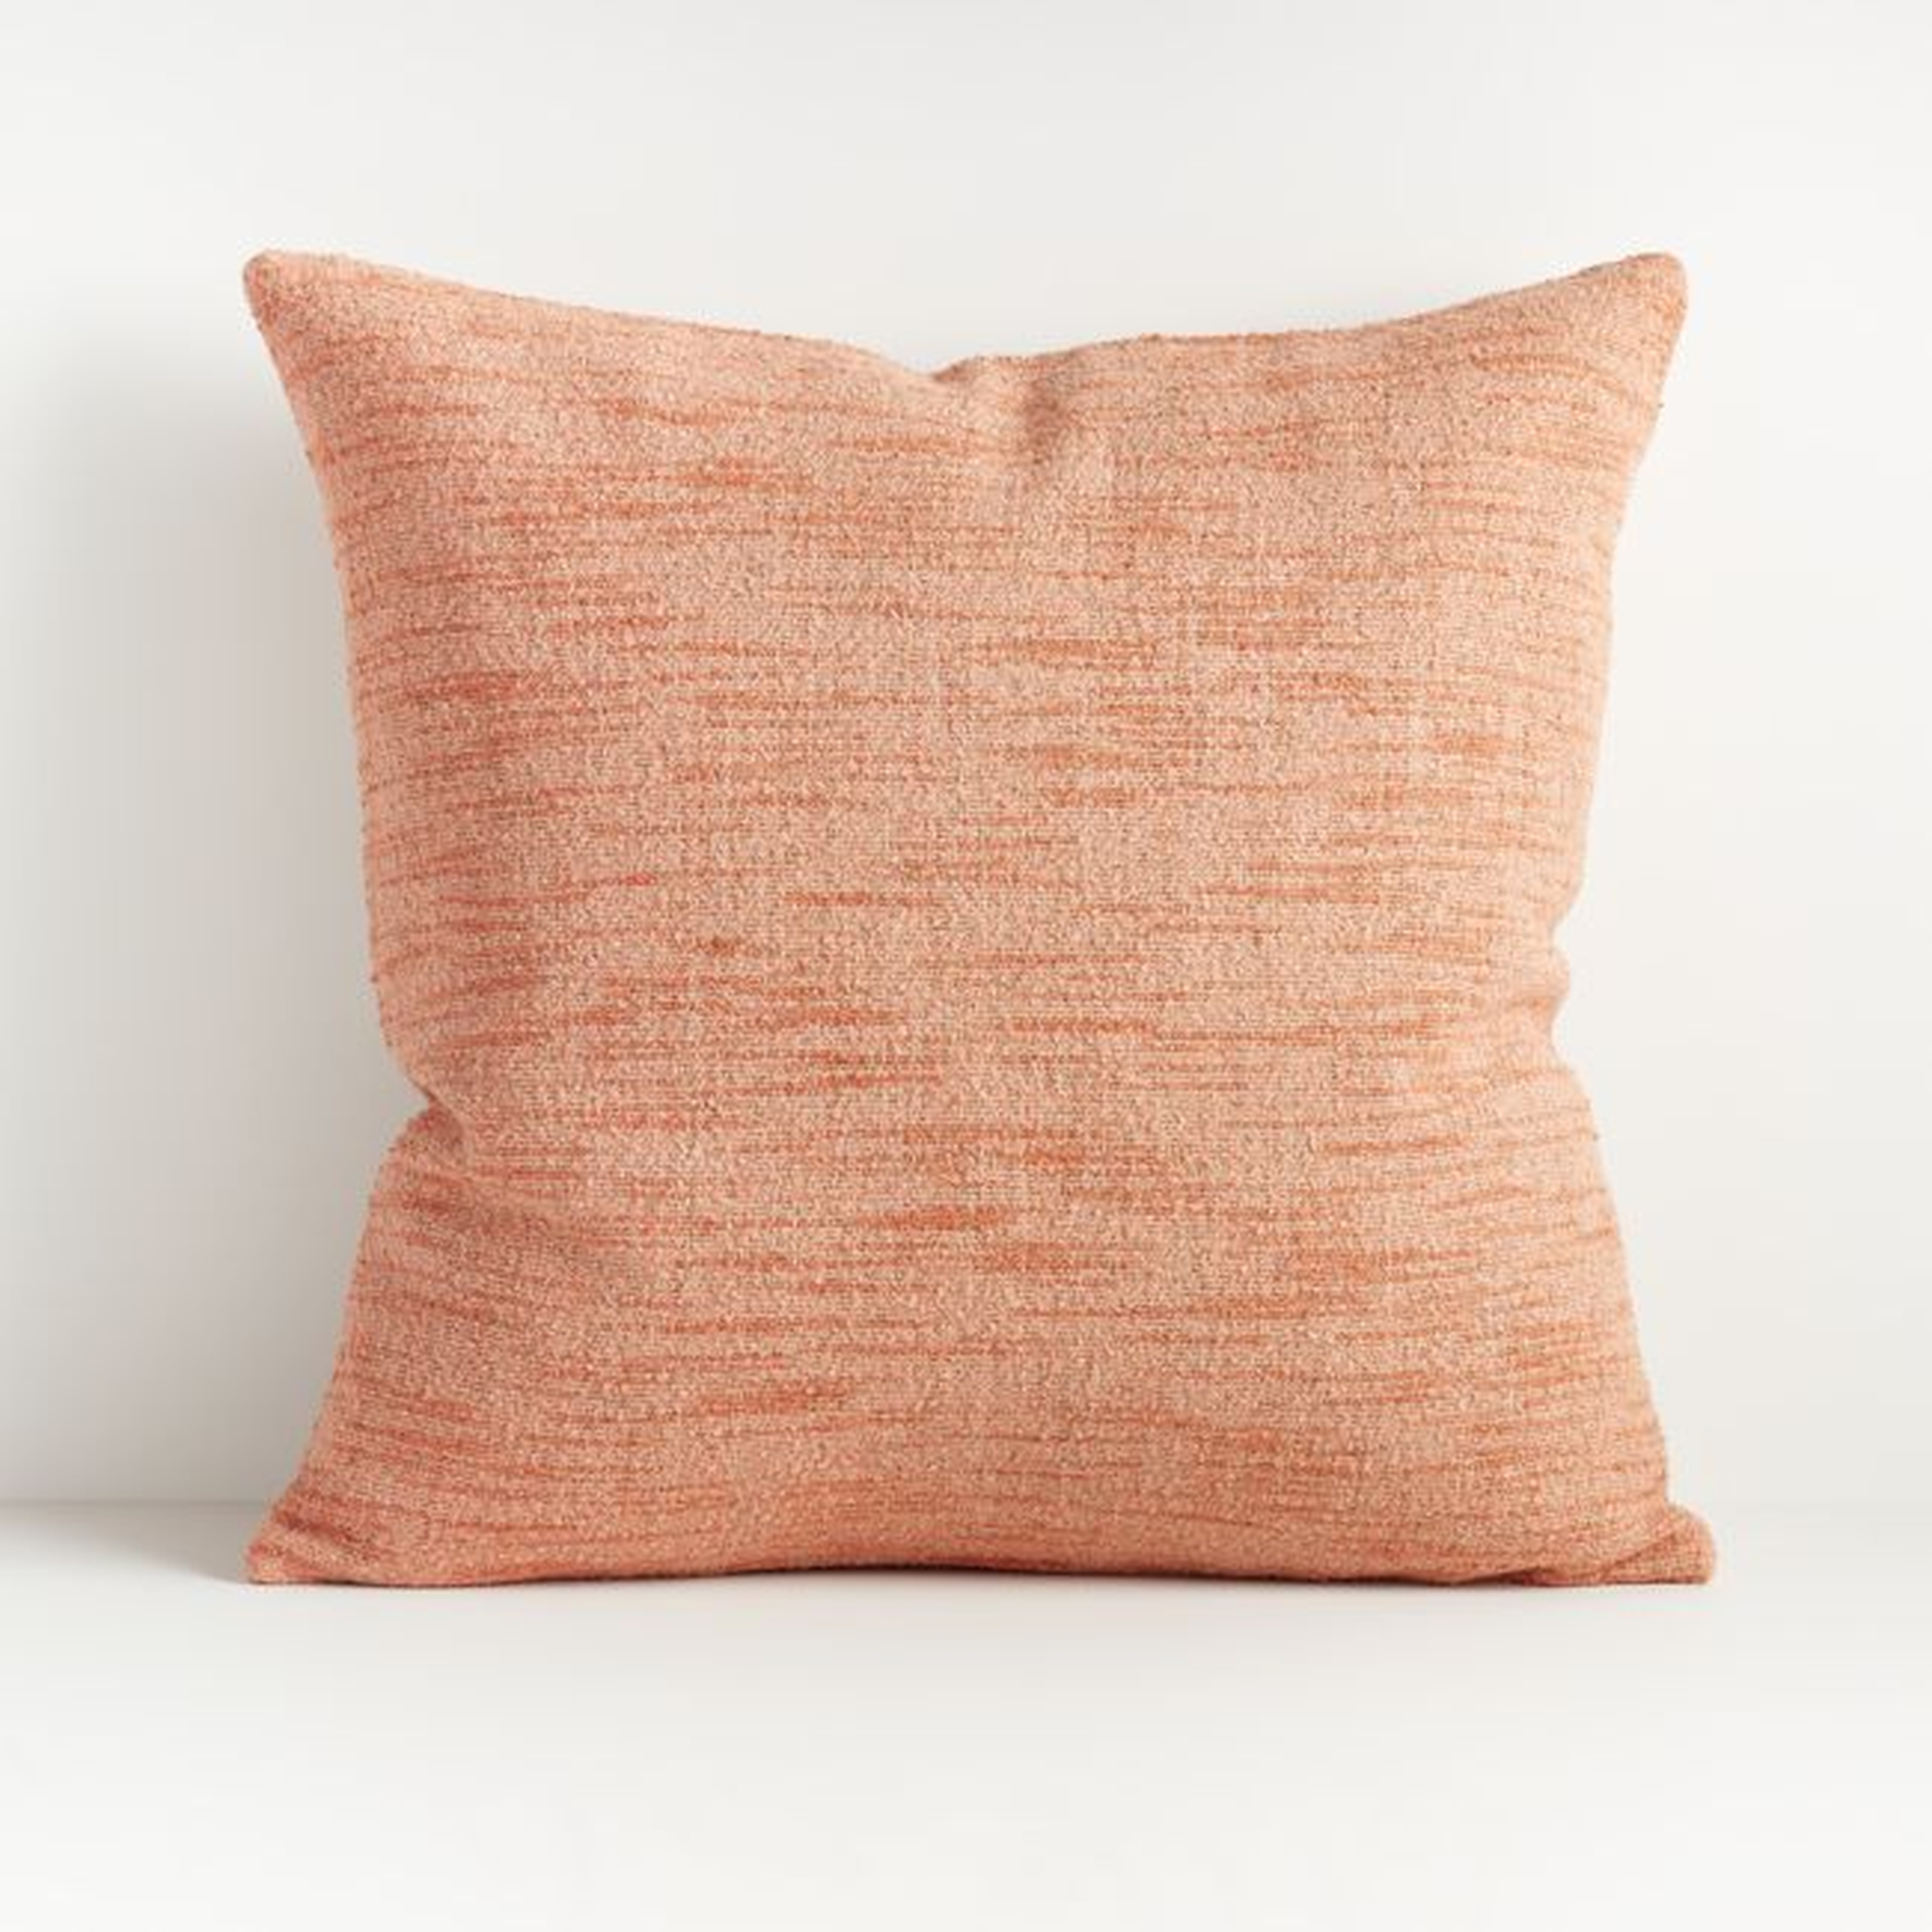 Emi Blush Throw Pillow 20" with Down-Alternative Insert - Crate and Barrel